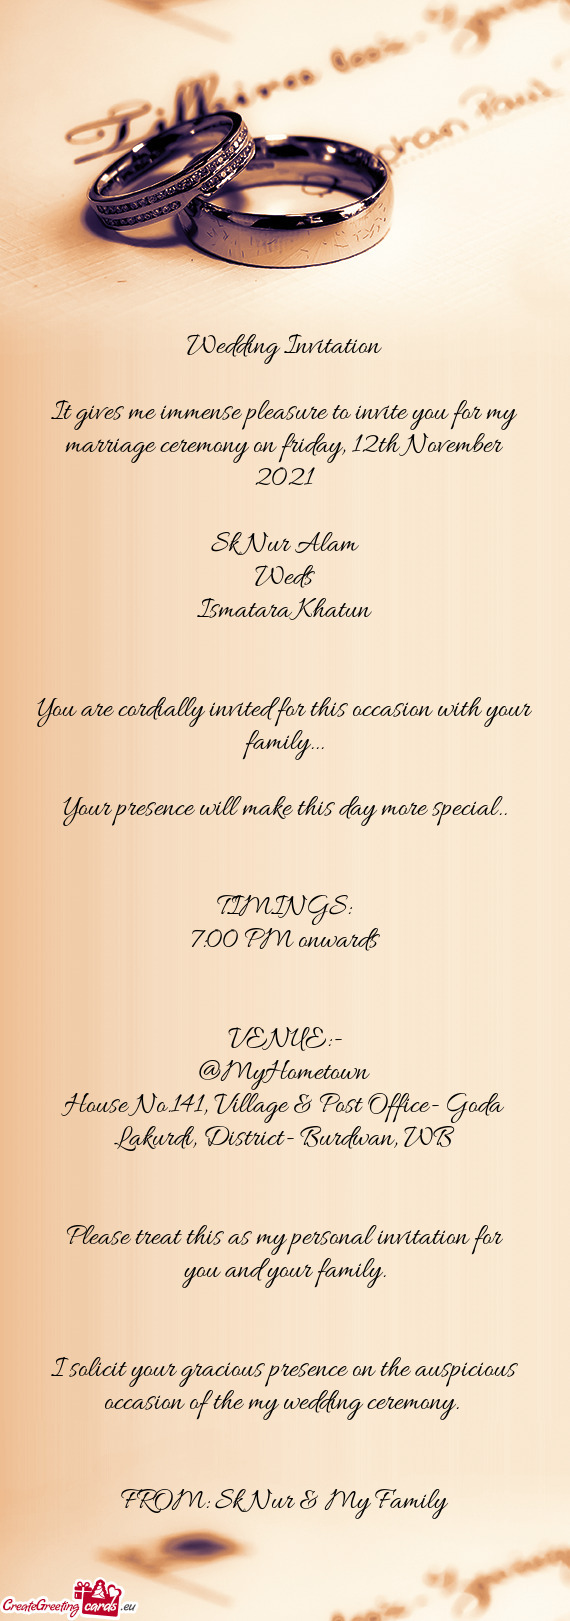 It gives me immense pleasure to invite you for my marriage ceremony on friday, 12th November 2021